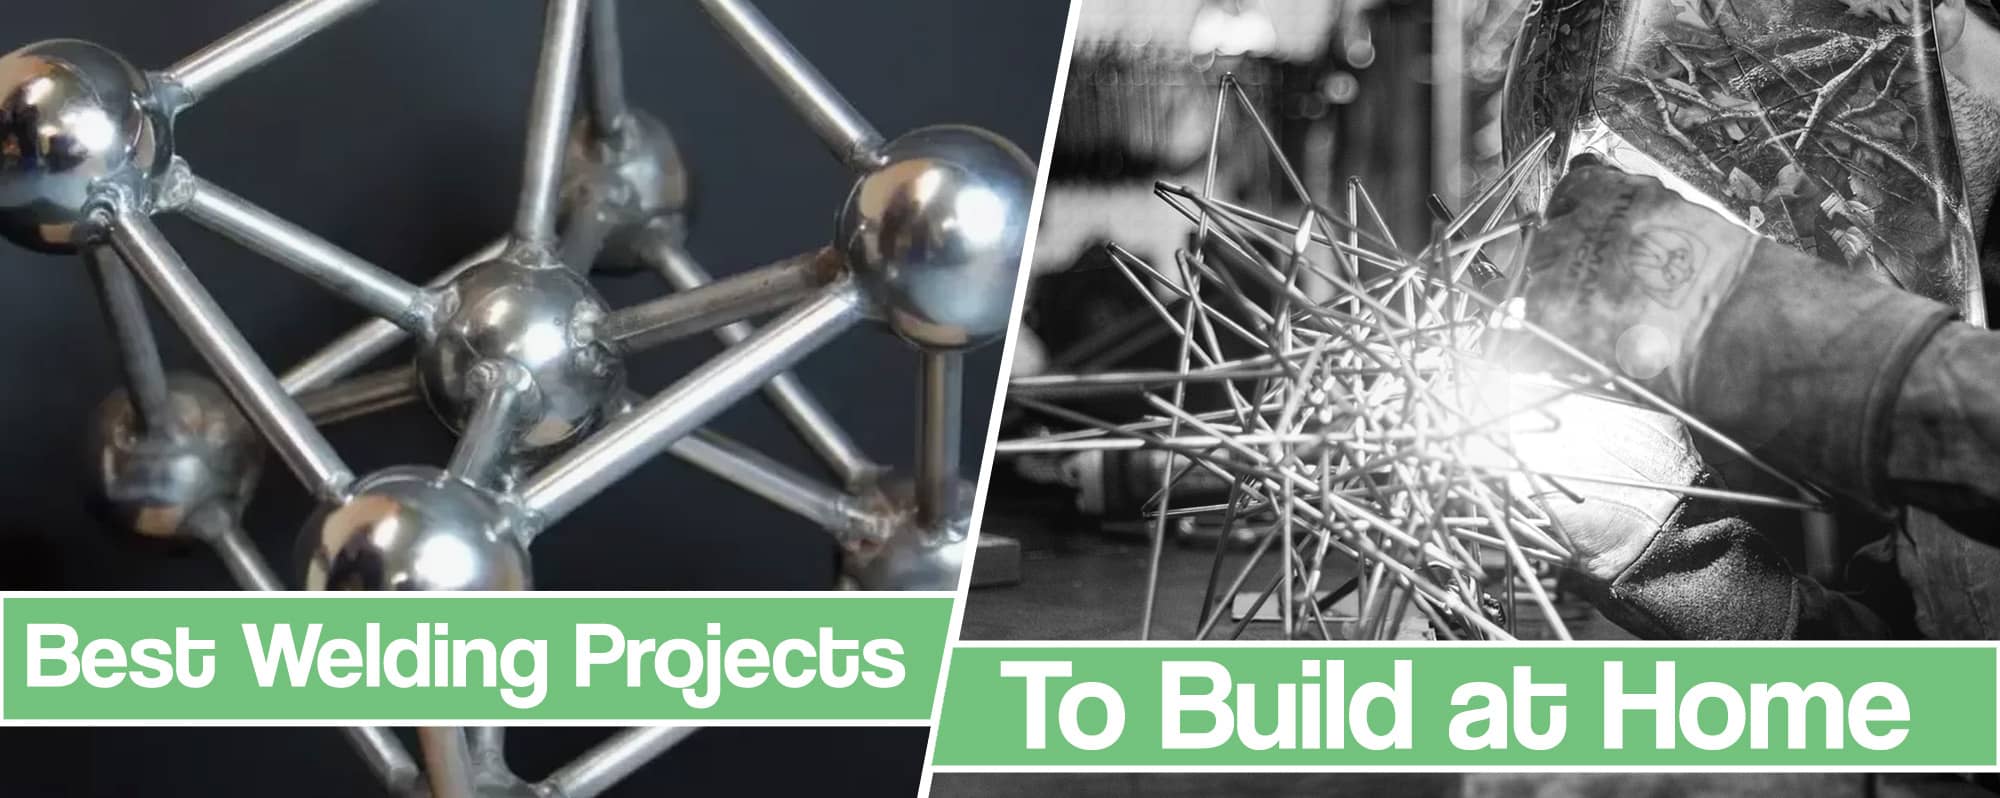 Feature image for best welding projects article